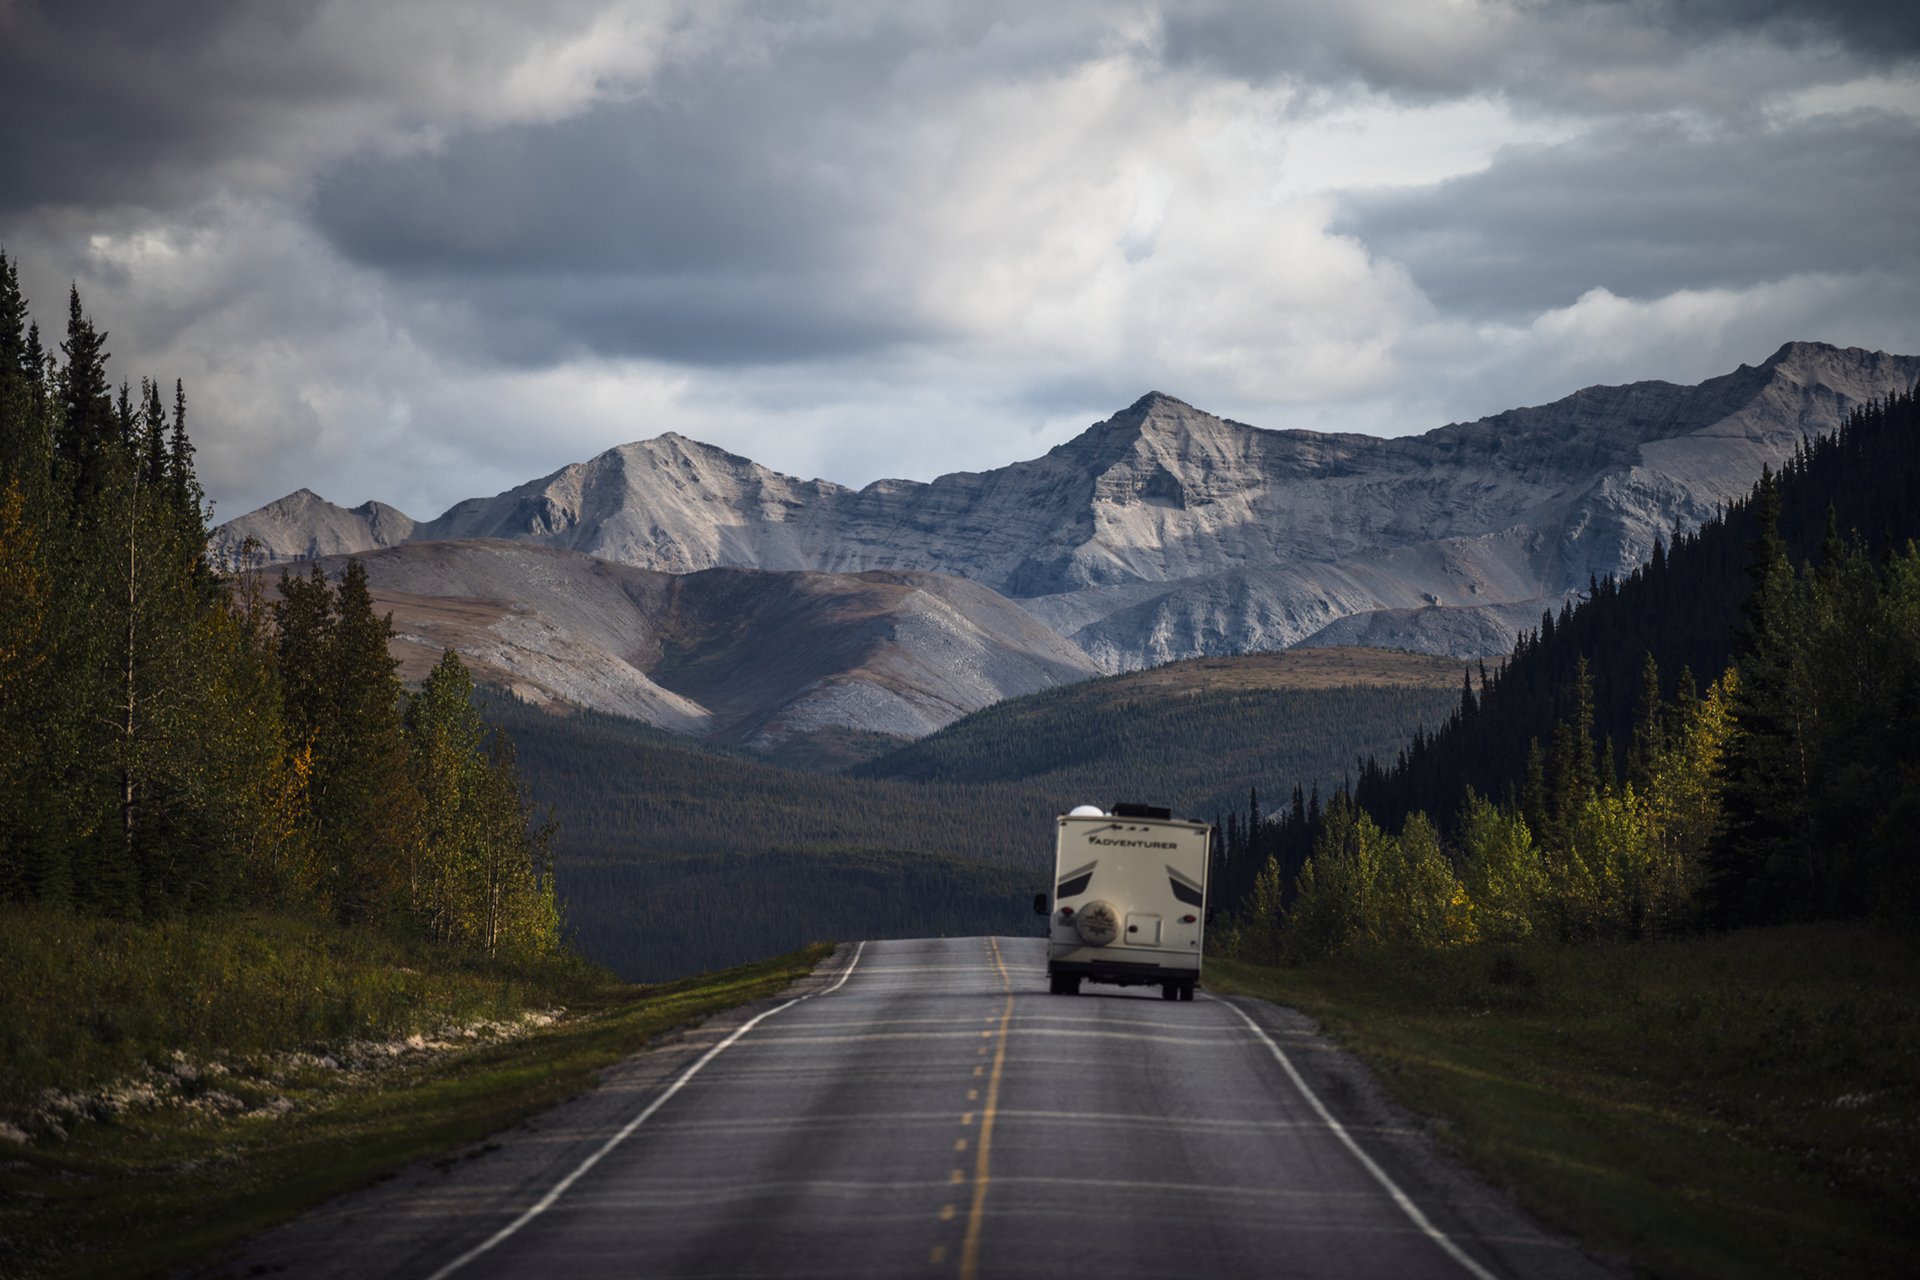 An RV drives down a quiet highway towards a mountain range in the distance. Words on the back of the RV read, "Adventures."